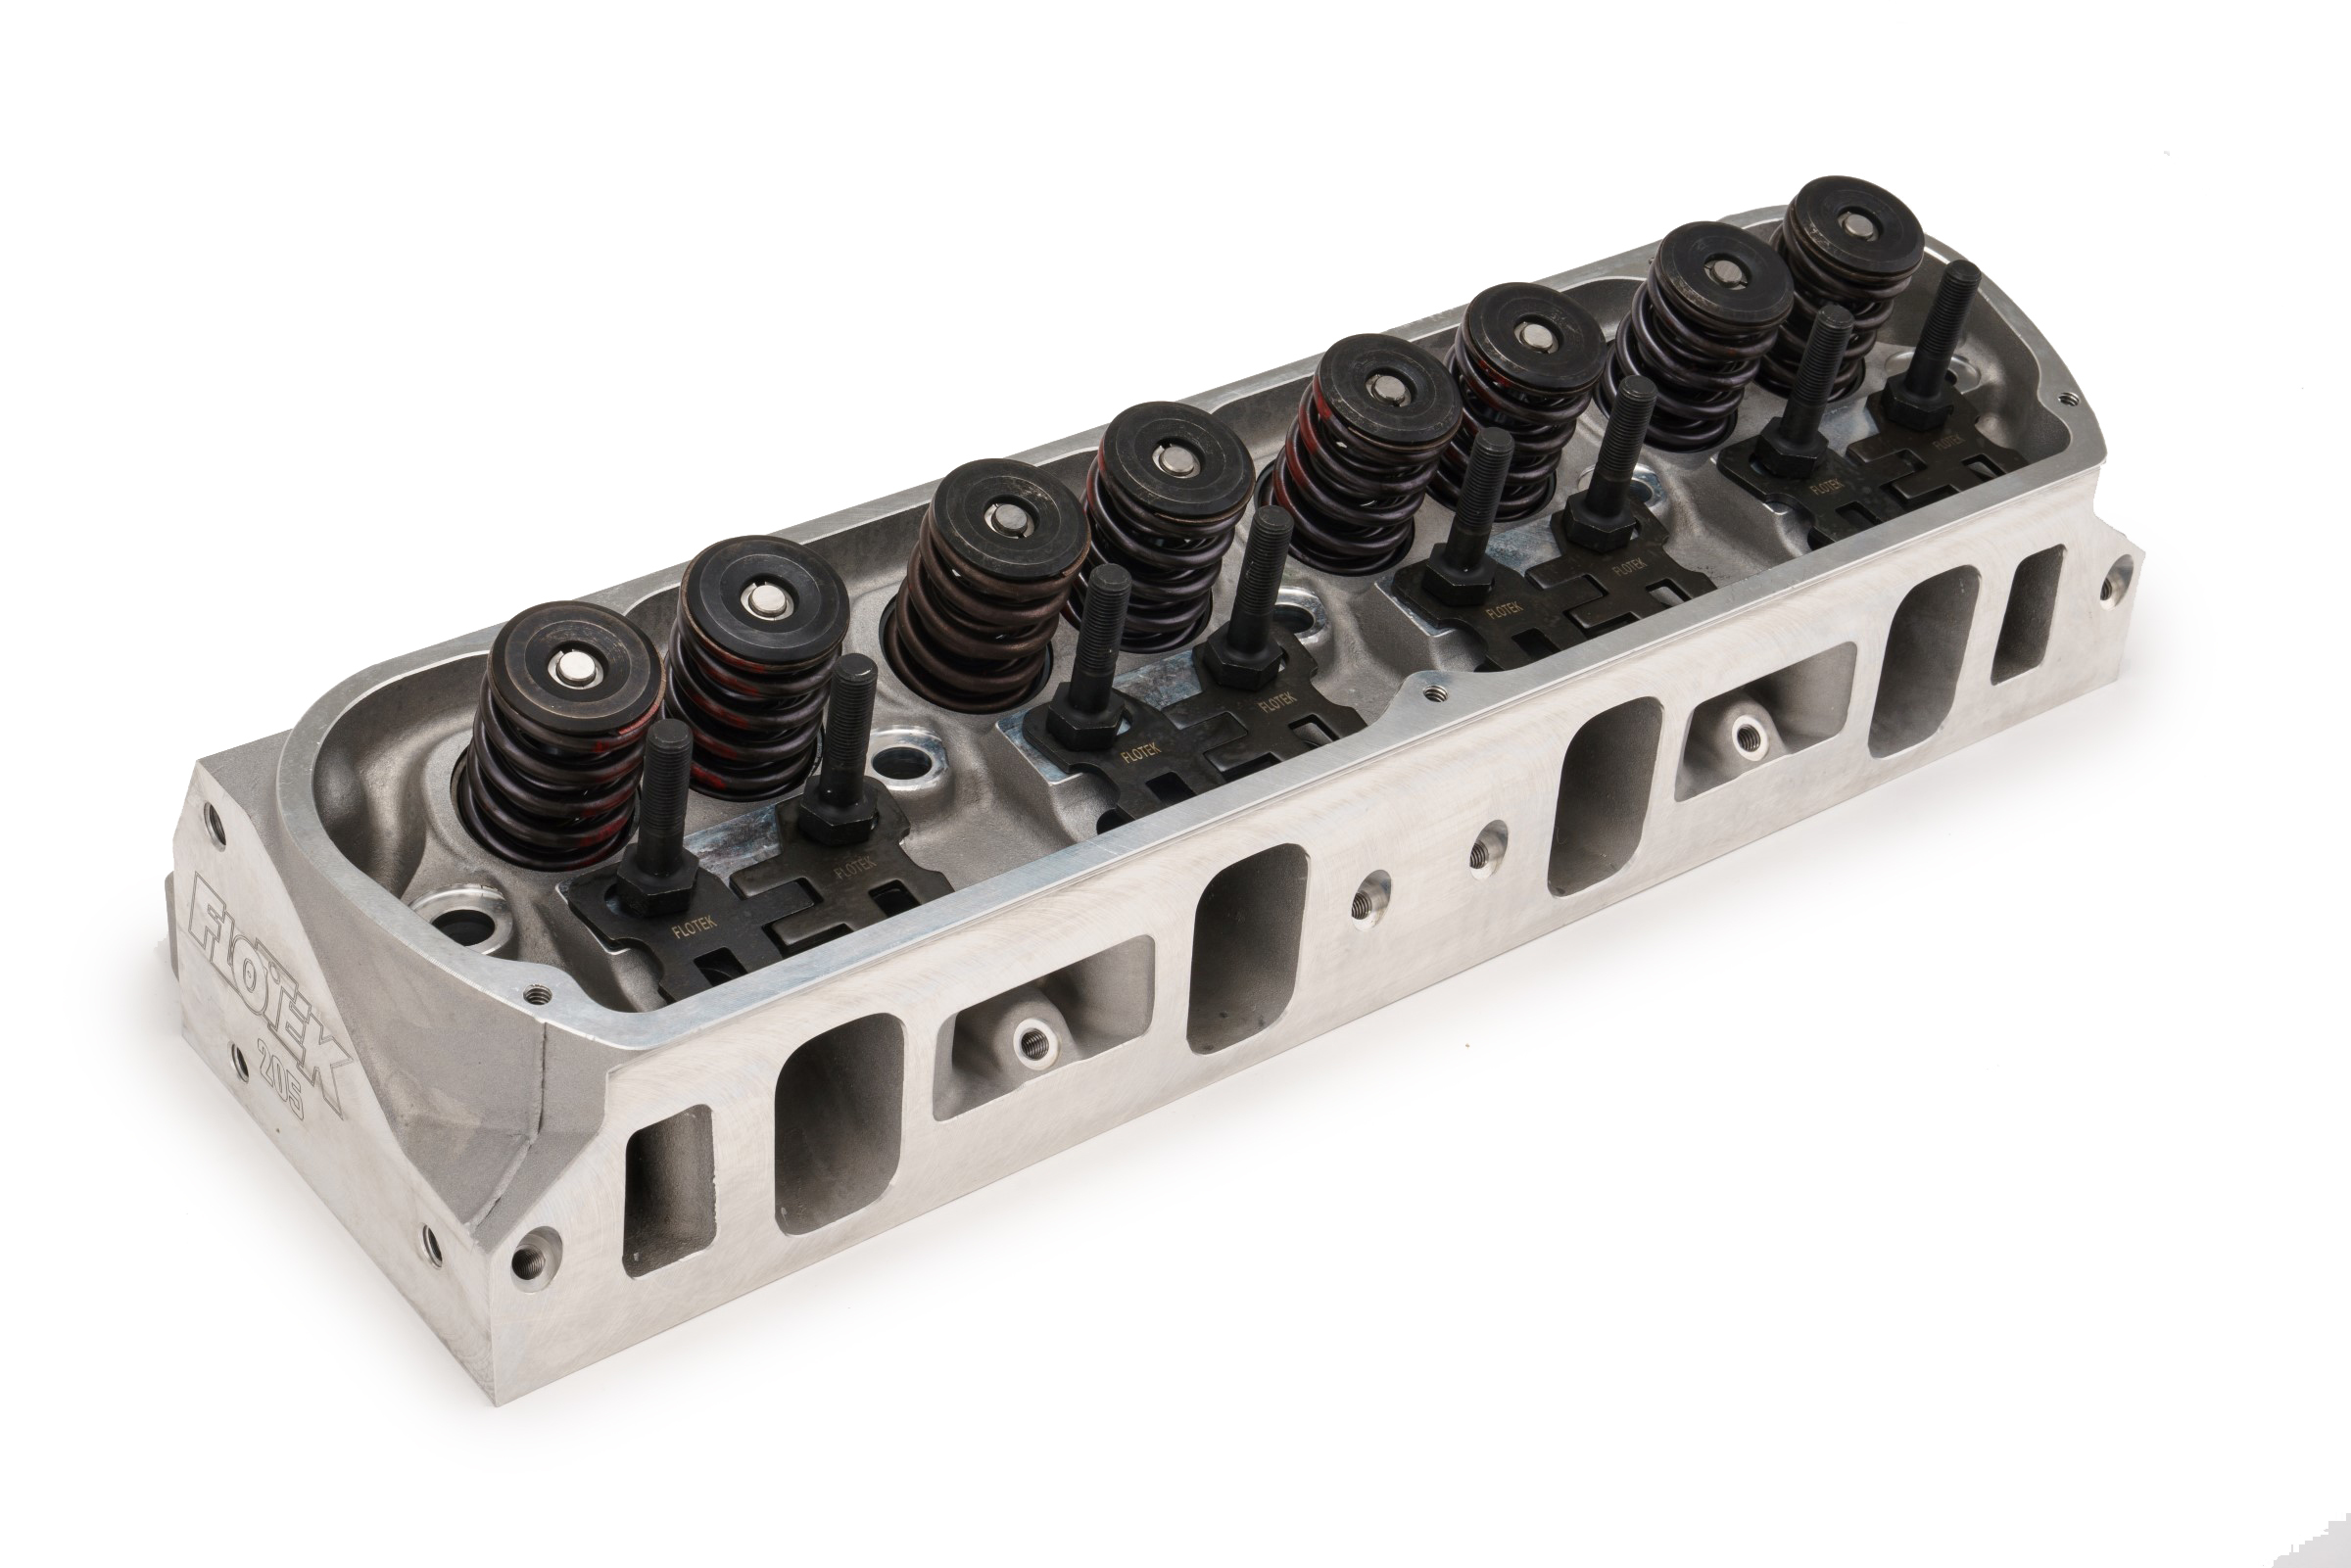 Flo Tek 2205-HR-505 Cylinder Head, The Hammer, Assembled, 2.080 / 1.600 in Valves, 205 cc Intake, 60 cc Chamber, 1.580 in Springs, Aluminum, Small Block Ford, Each